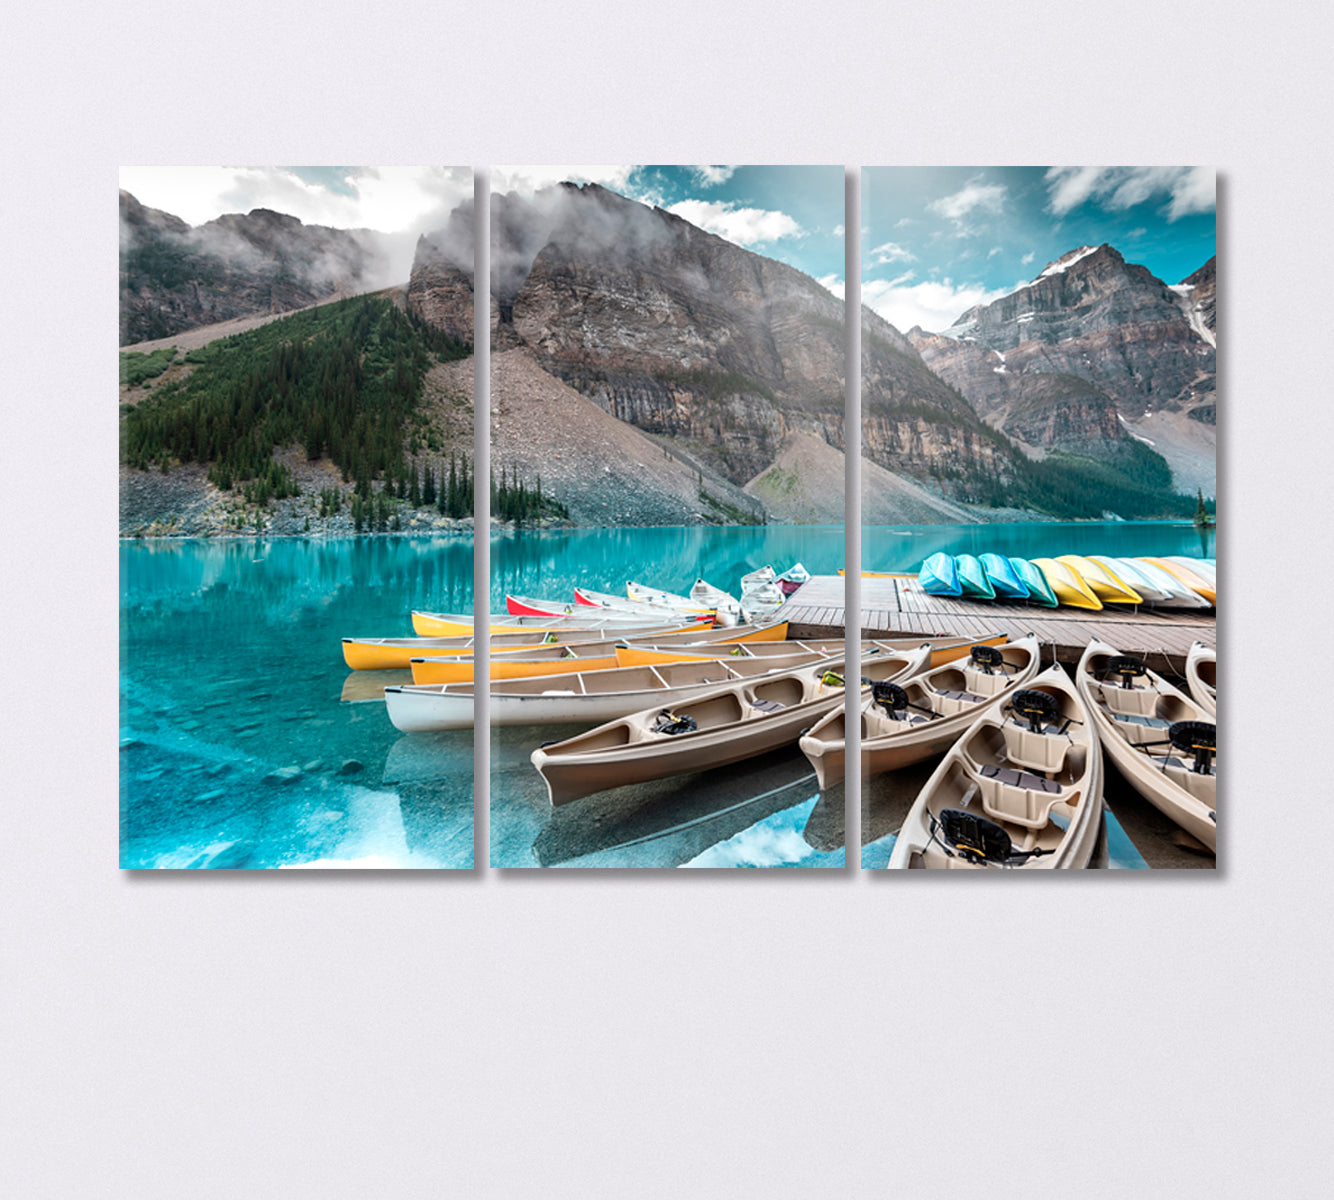 Canoe on the Lake in Banff National Park Canada Canvas Print-Canvas Print-CetArt-3 Panels-36x24 inches-CetArt